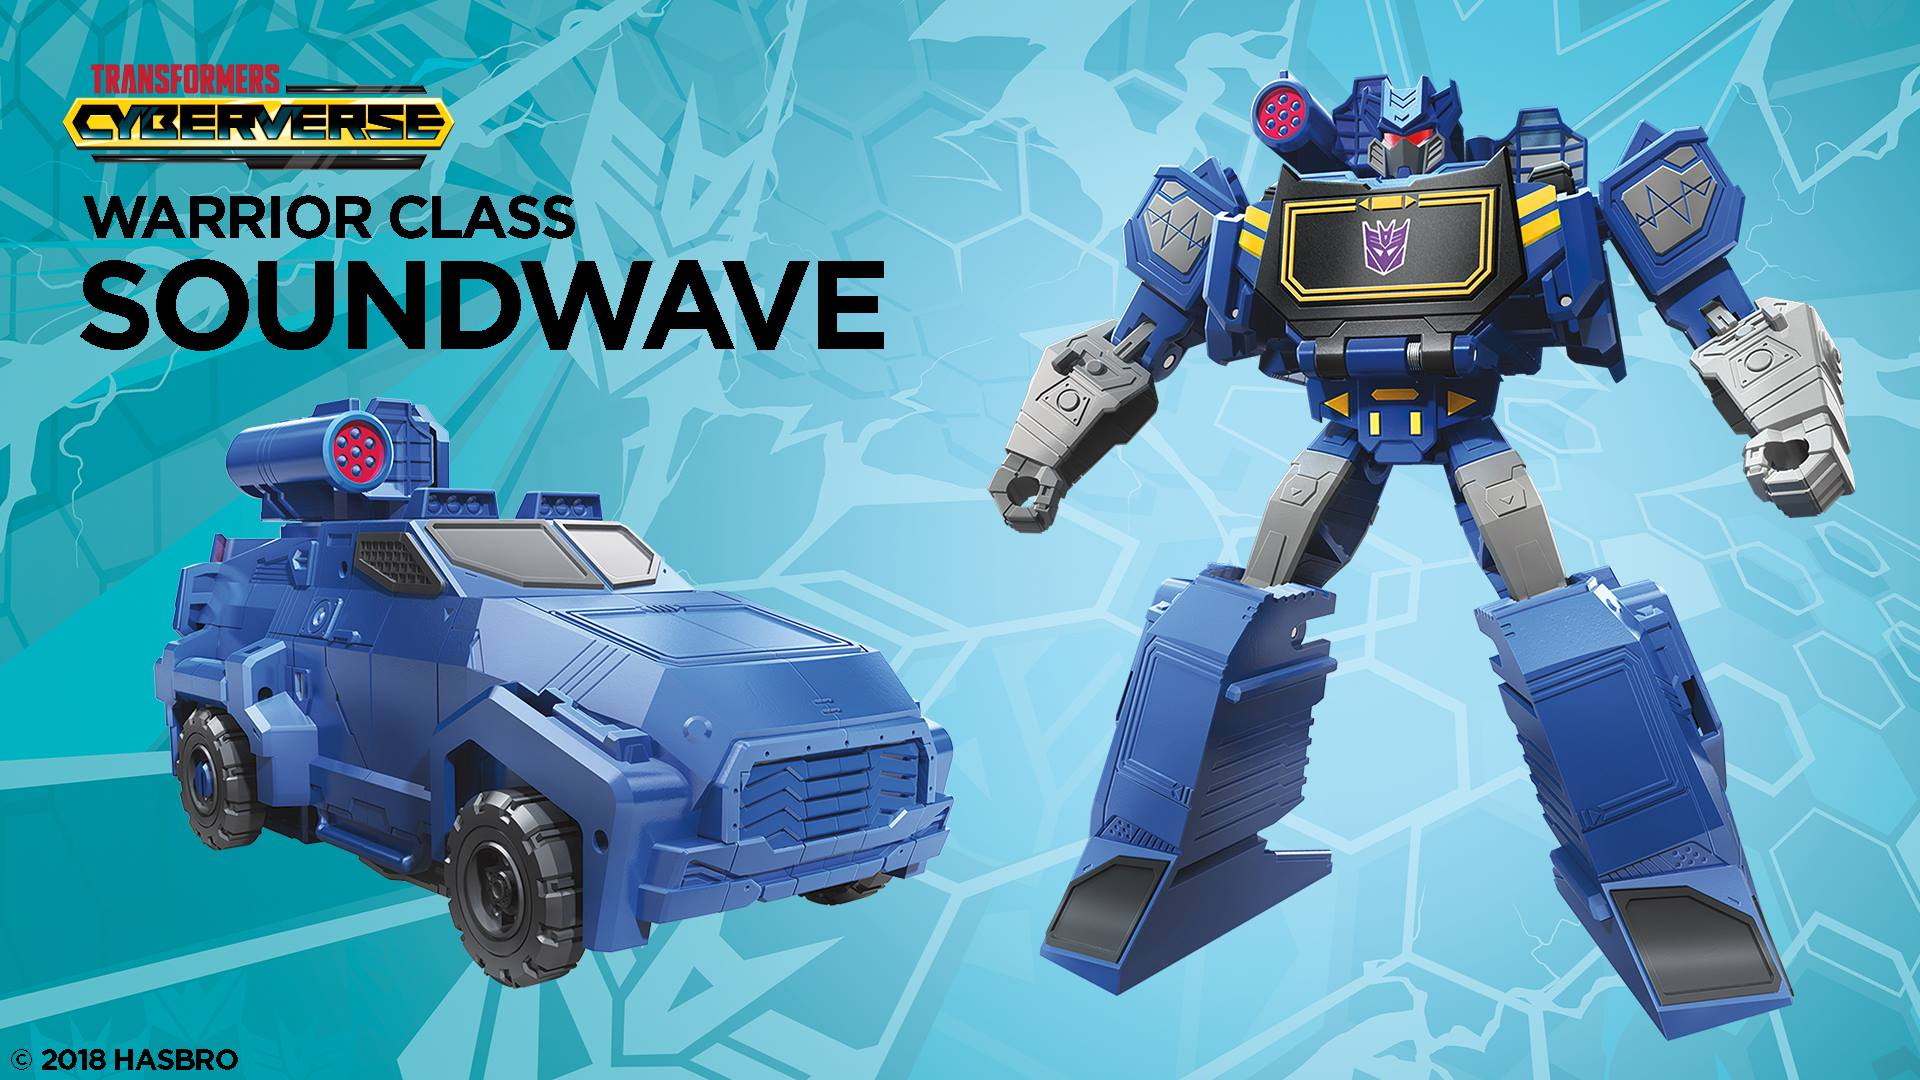 1920x1080 Official Transformers Cyberverse Product Images Photo Gallery